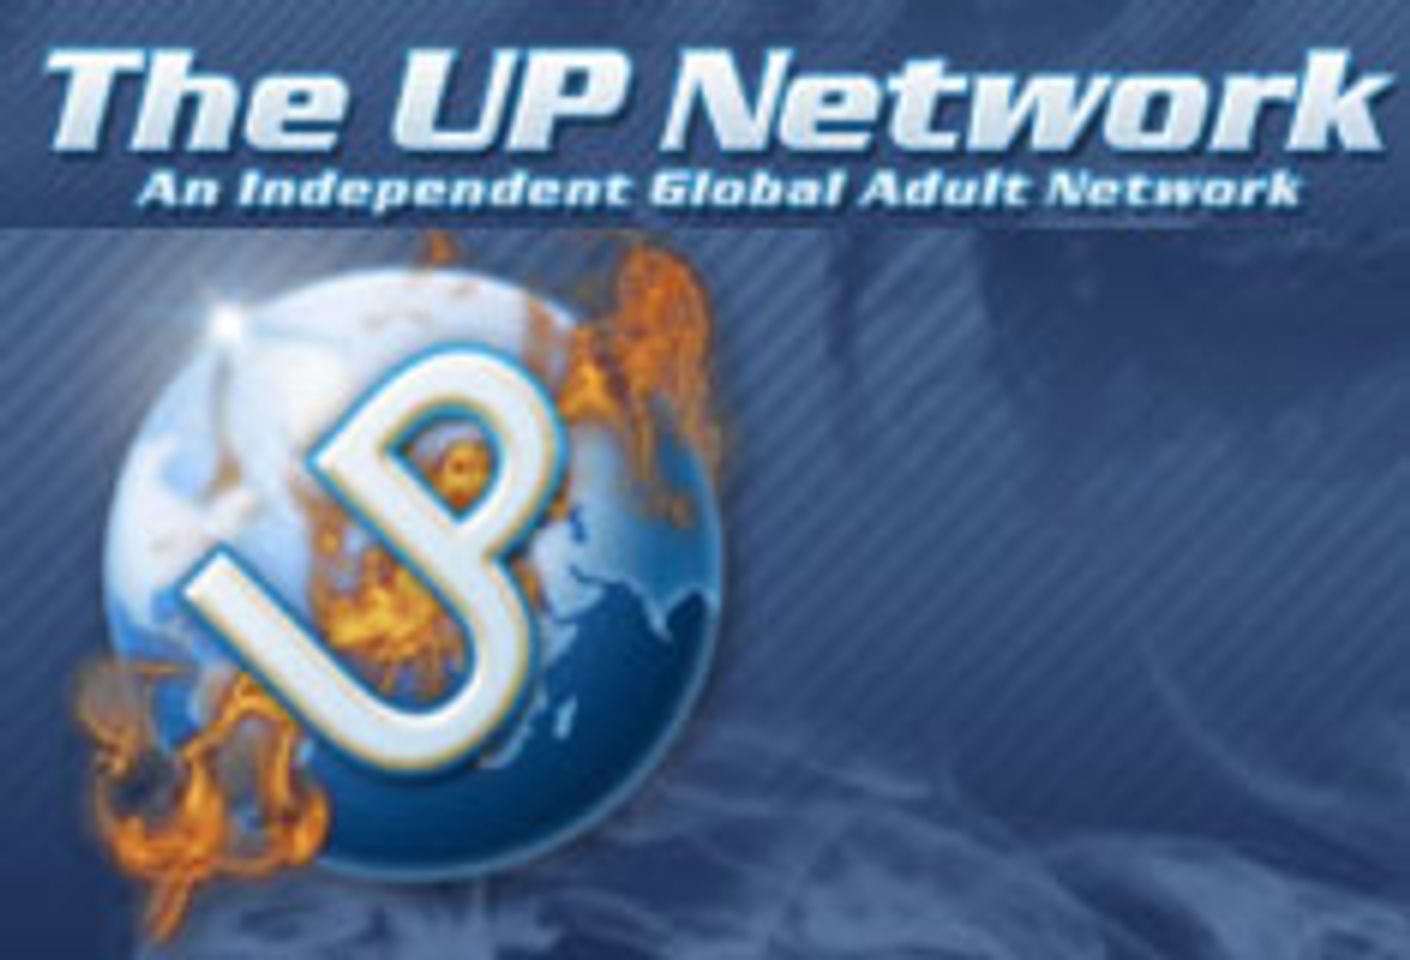 Bella-XXX Now Part of UP Network